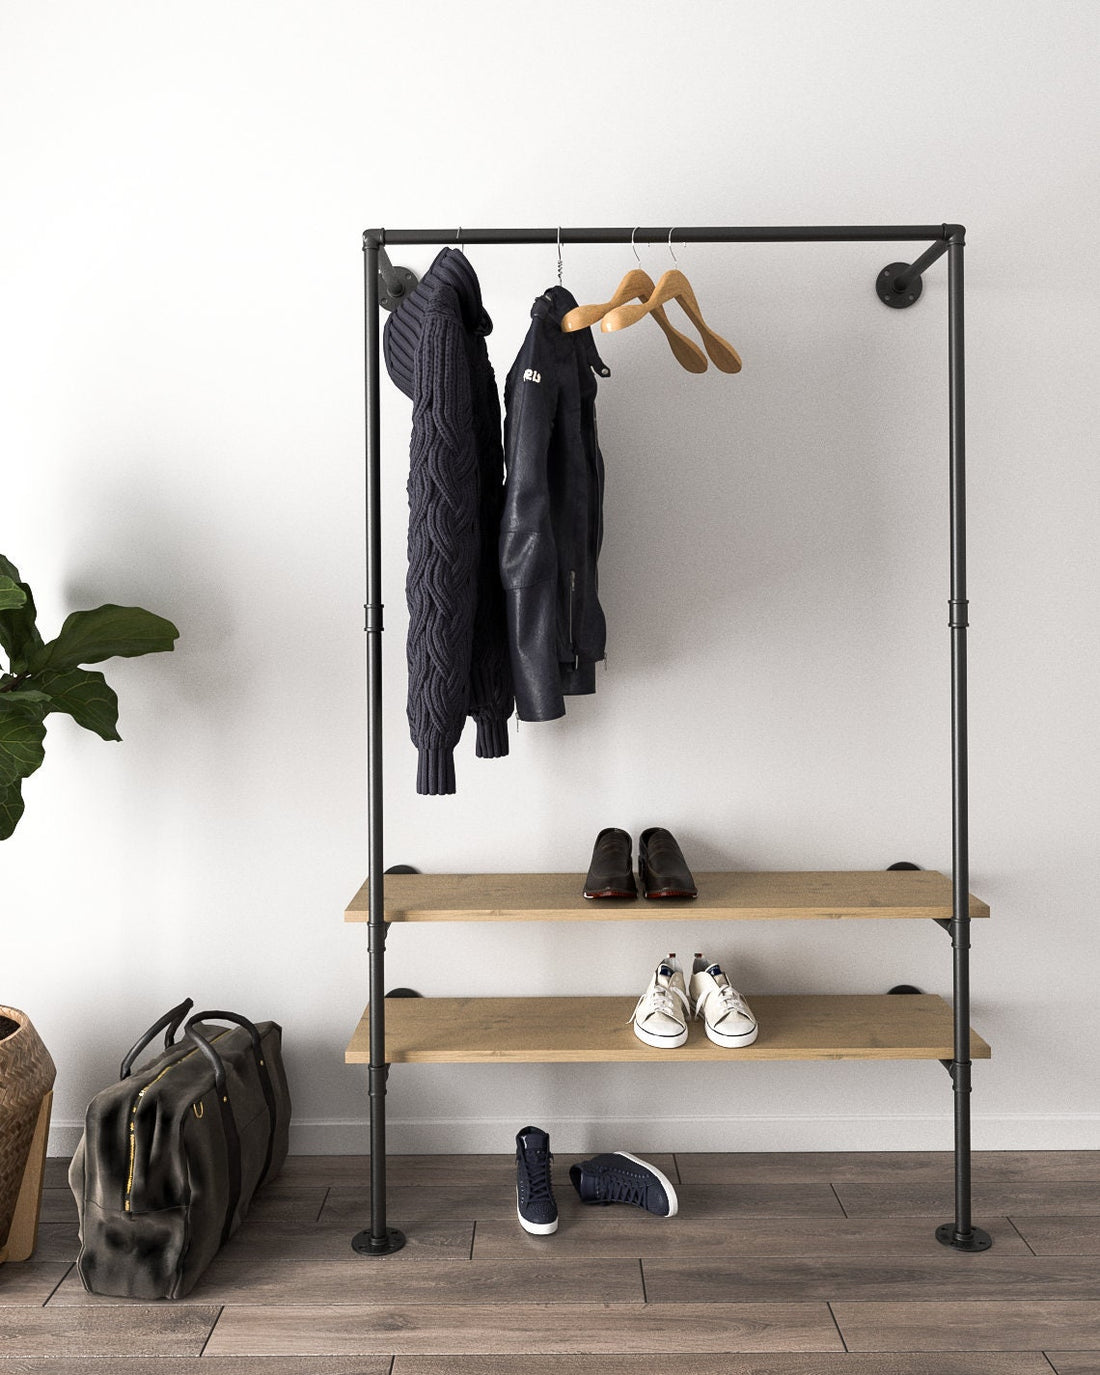 A versatile Closet Clothing Rail with hanging clothes, highlighting its space-saving design.